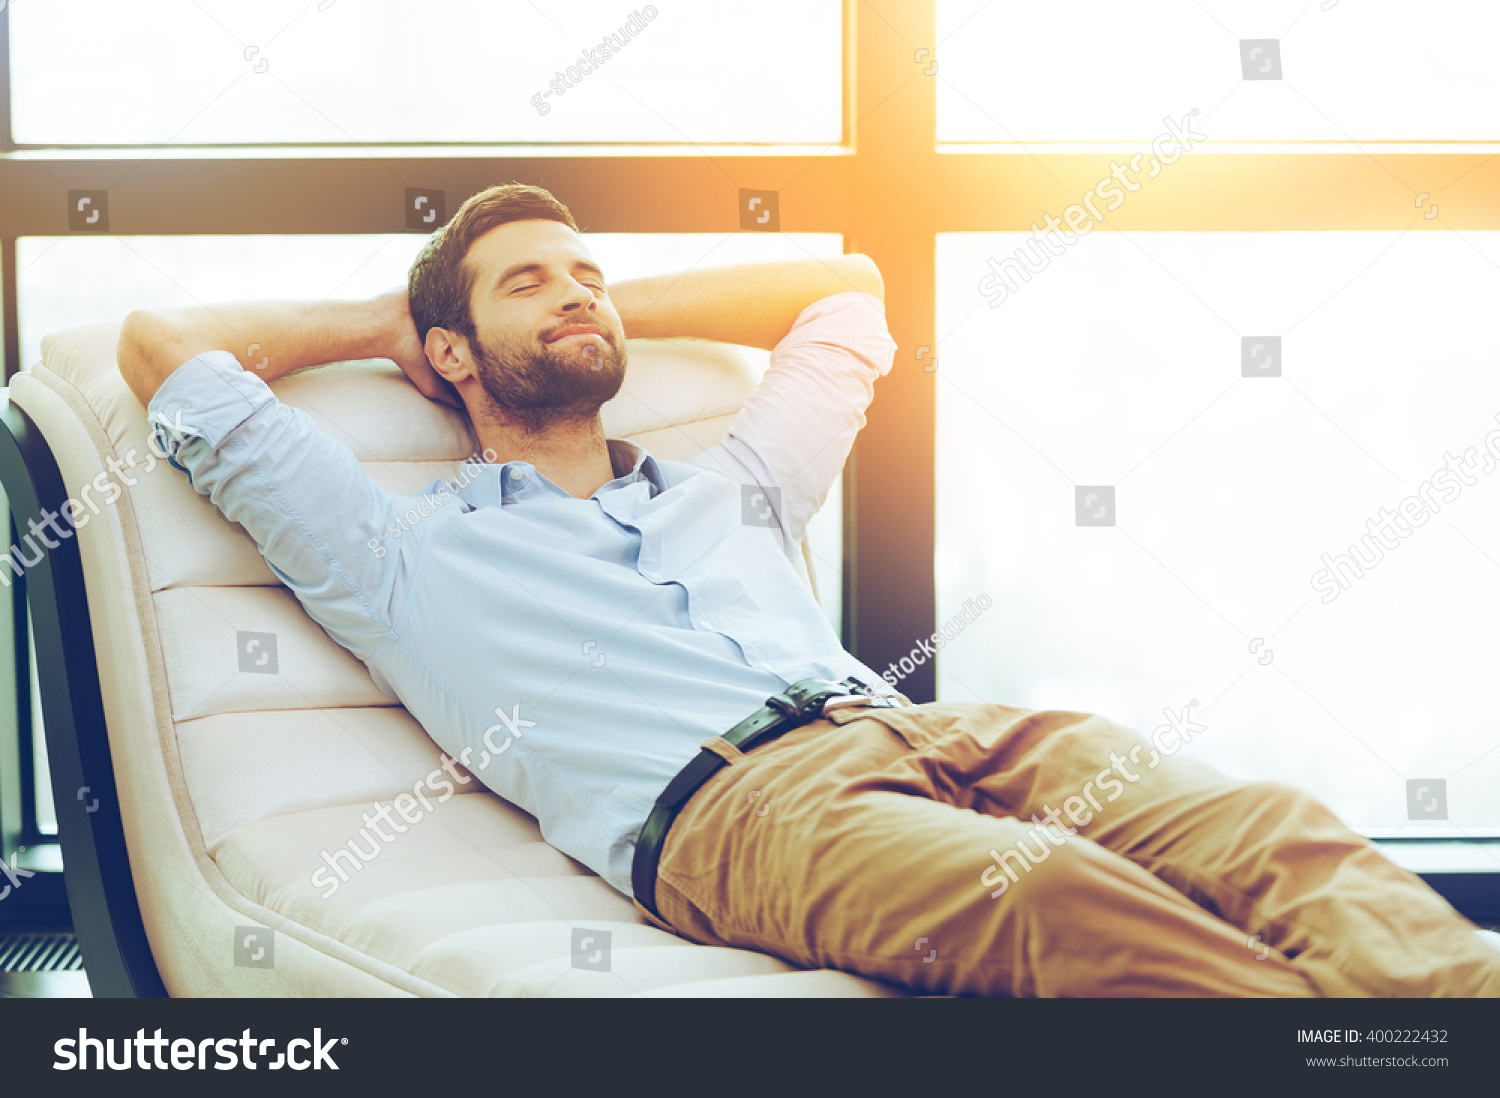 Time to relax. Handsome young man holding hands behind head while sleeping on the couch #400222432